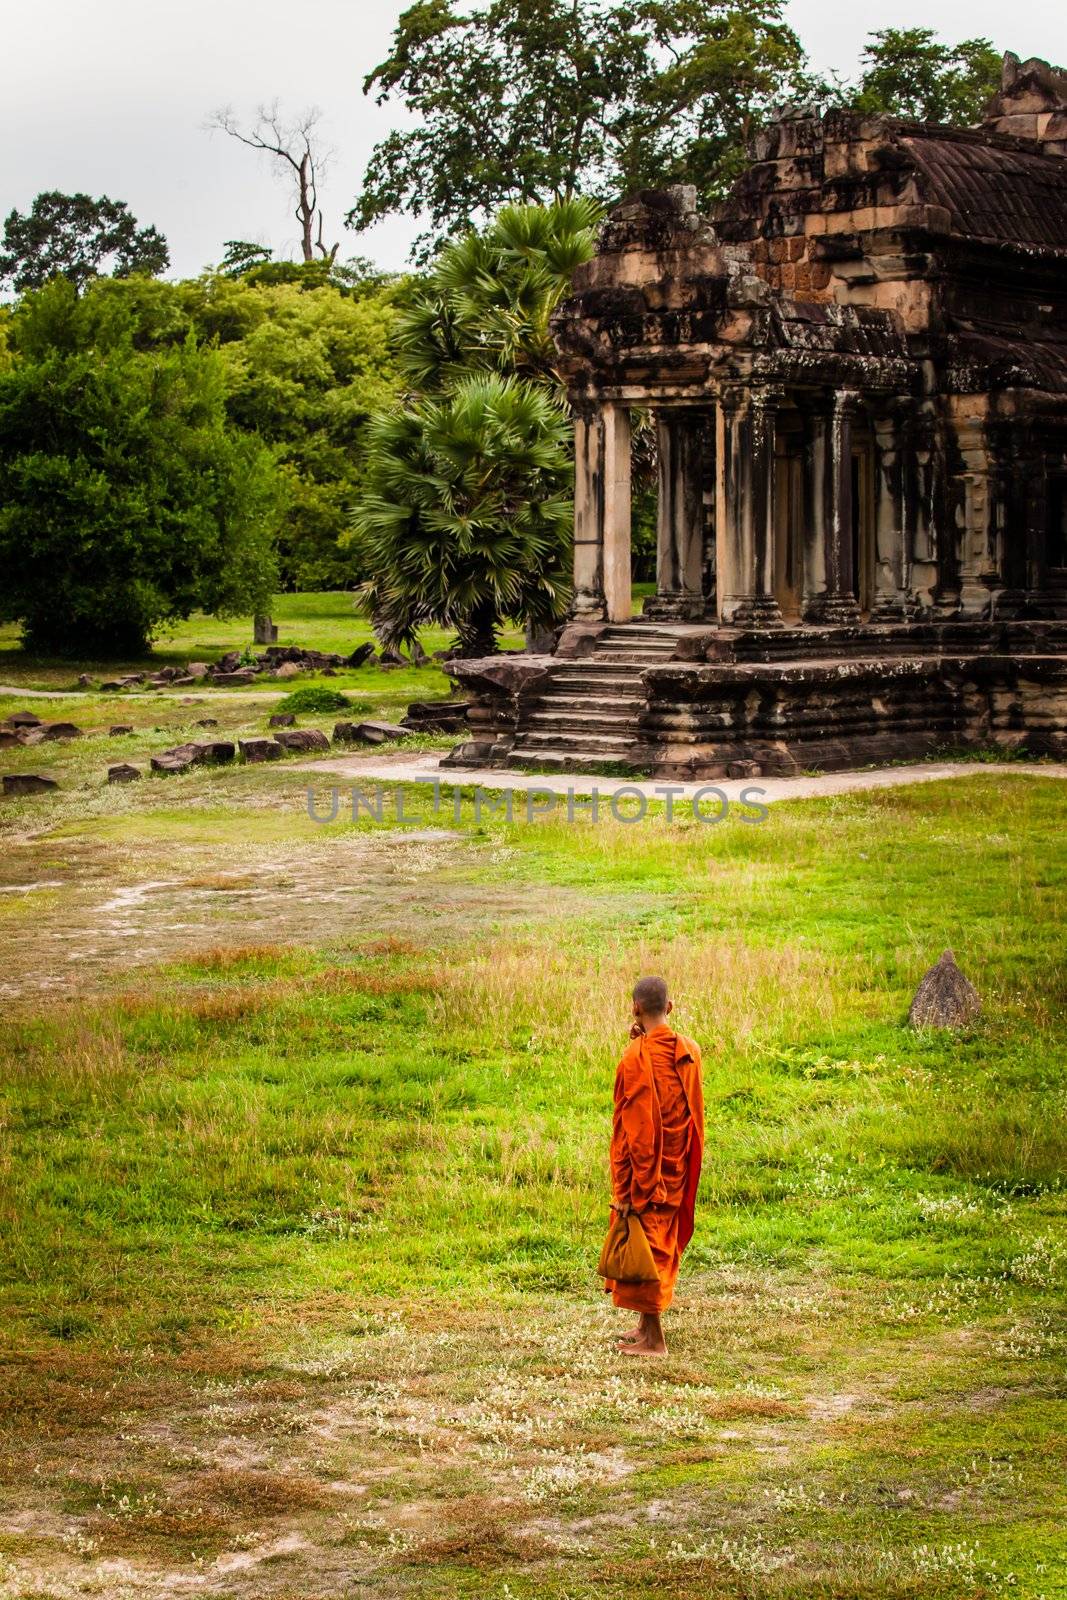 SIEM REAP, CAMBODIA - CIRCA JUNE 2012: Unidentified buddhist monk standing in the field circa June 2012 in Angkor Wat, Cambodia The monastery is still use as part of worship sacred place.